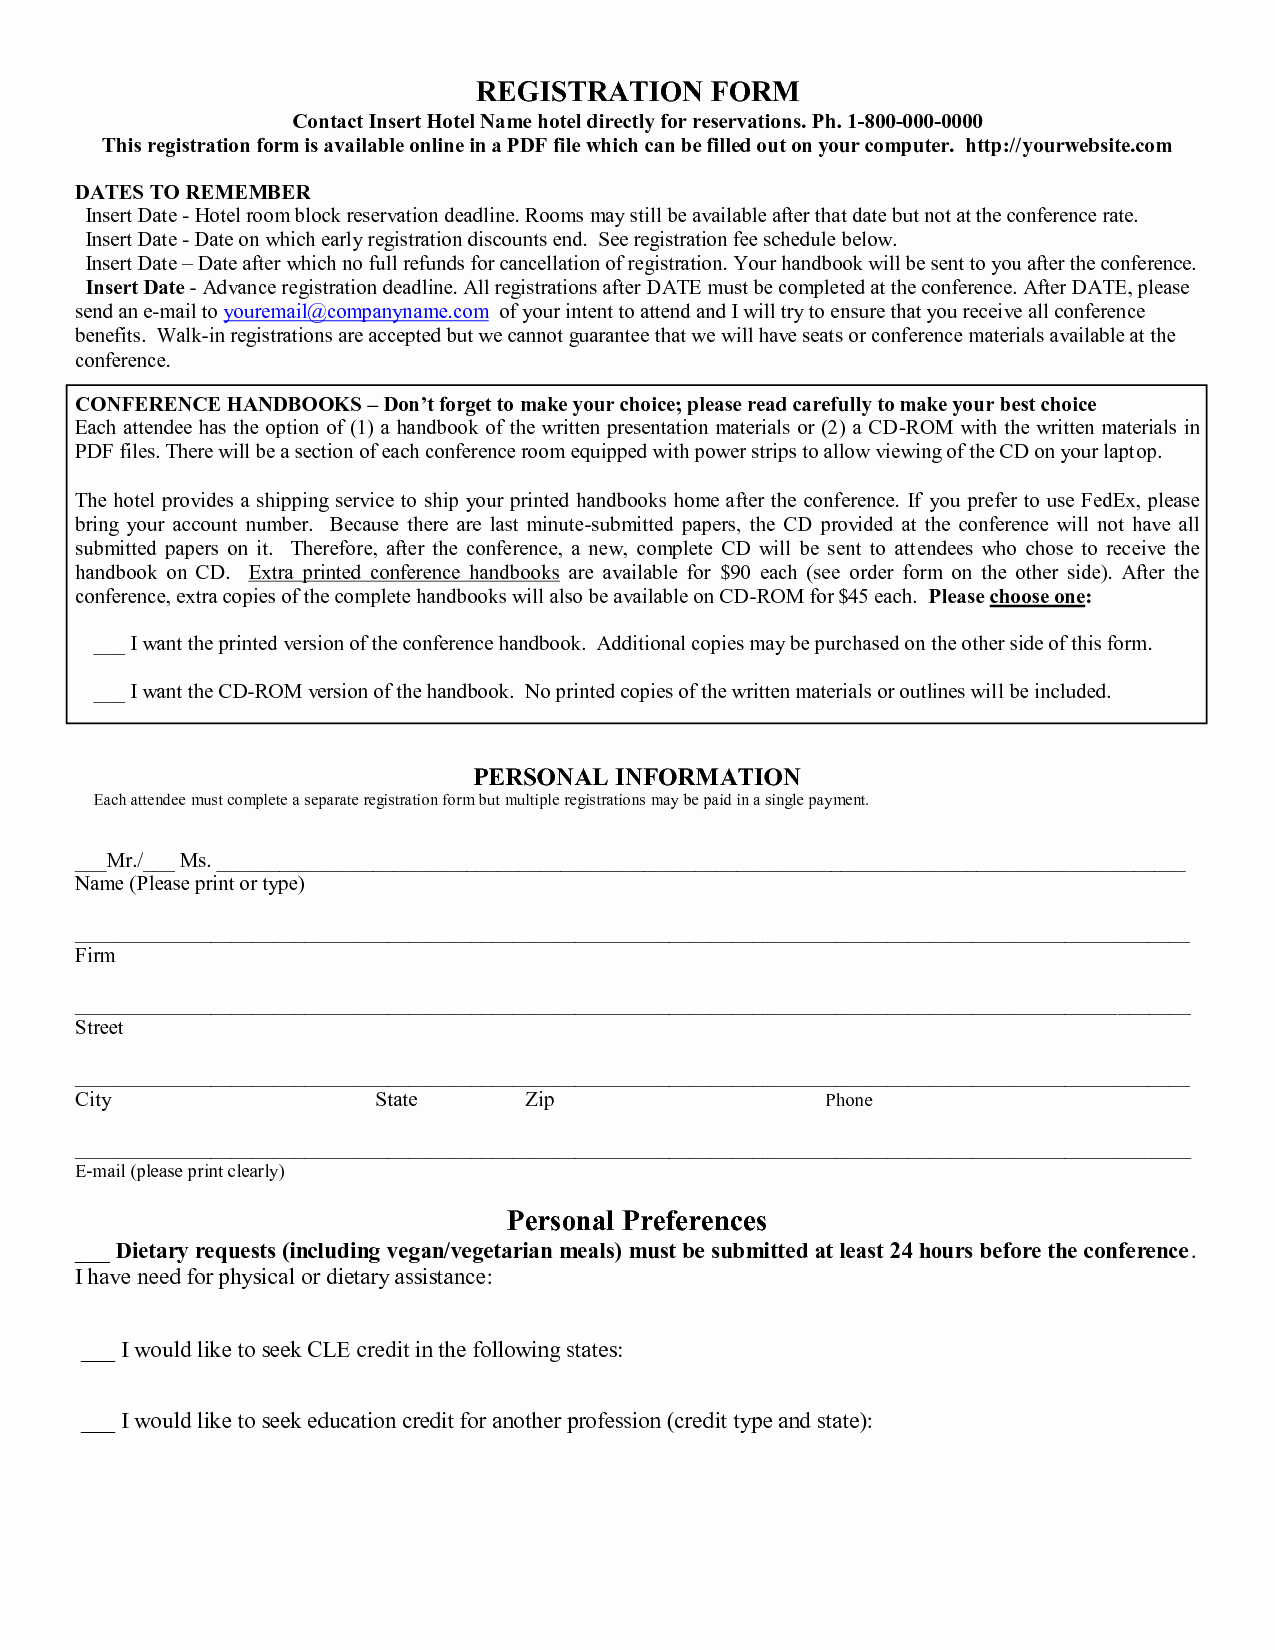 Conference Registration form Template Word New Registration form Template